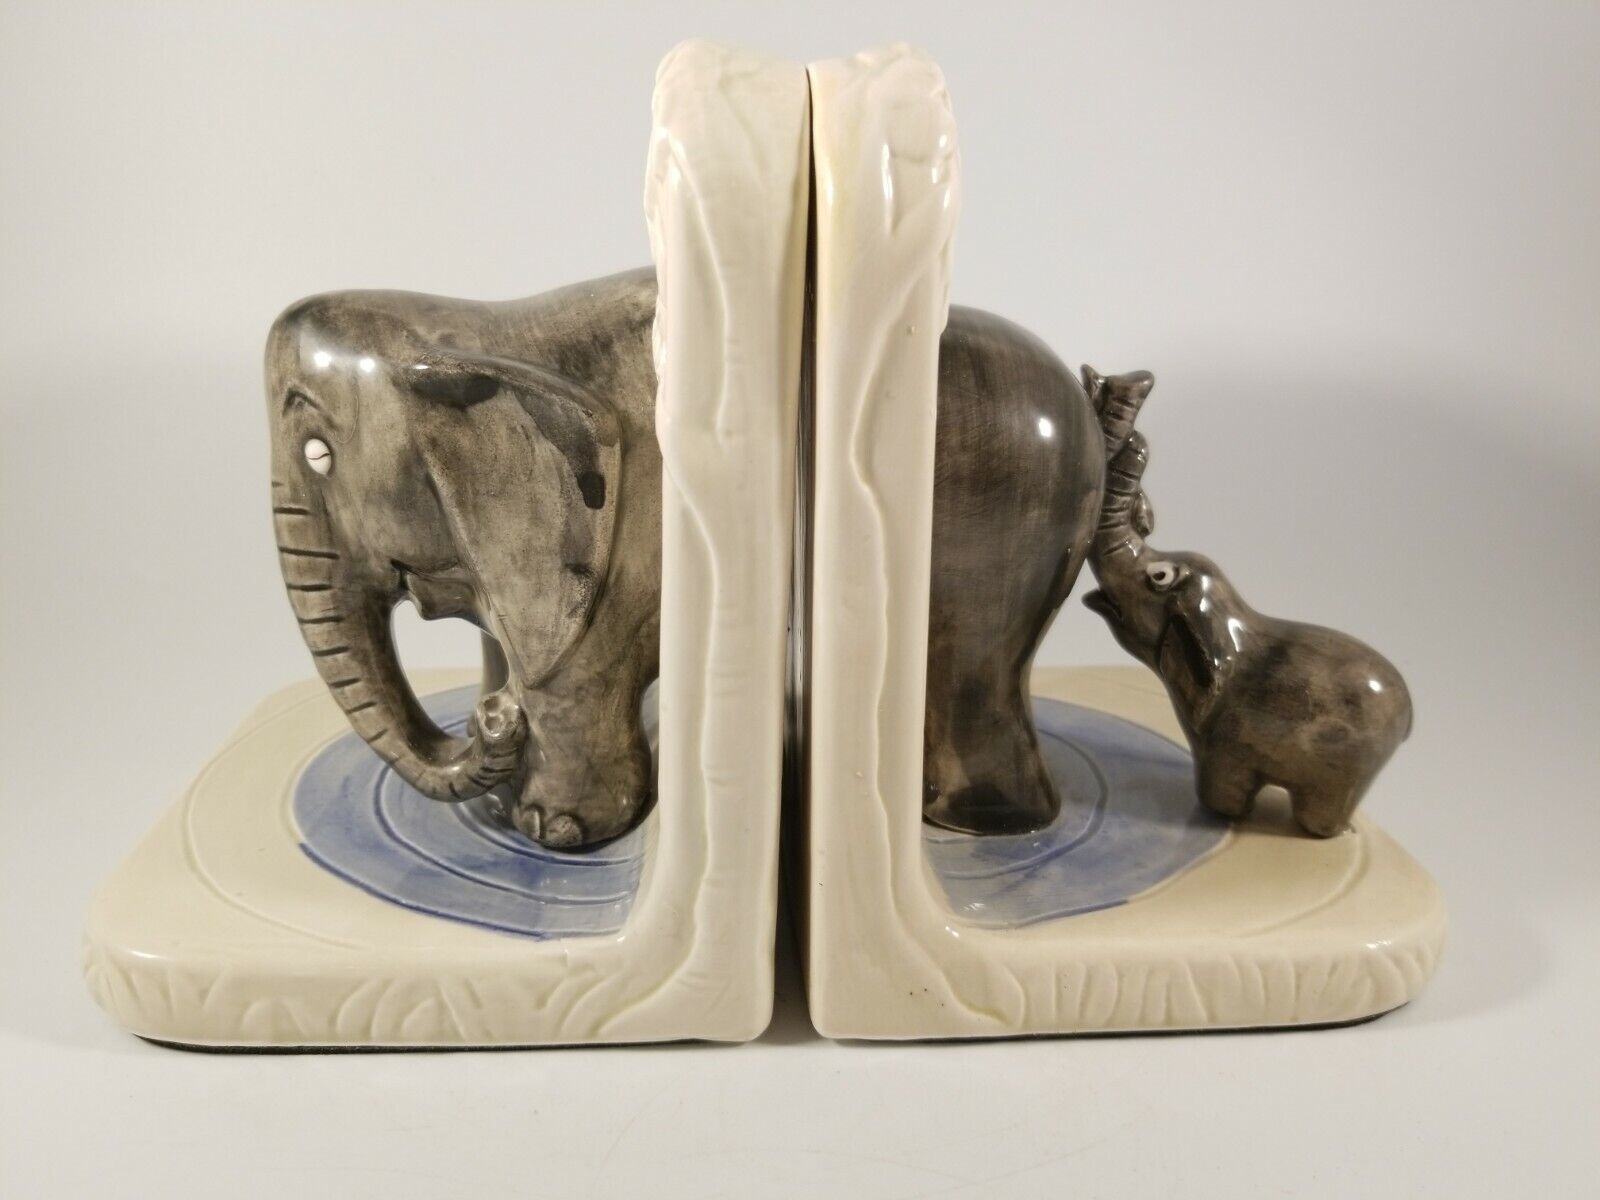 Rare Vintage Quon Quon Porcelain Elephant Mom and Baby Japanese Bookends